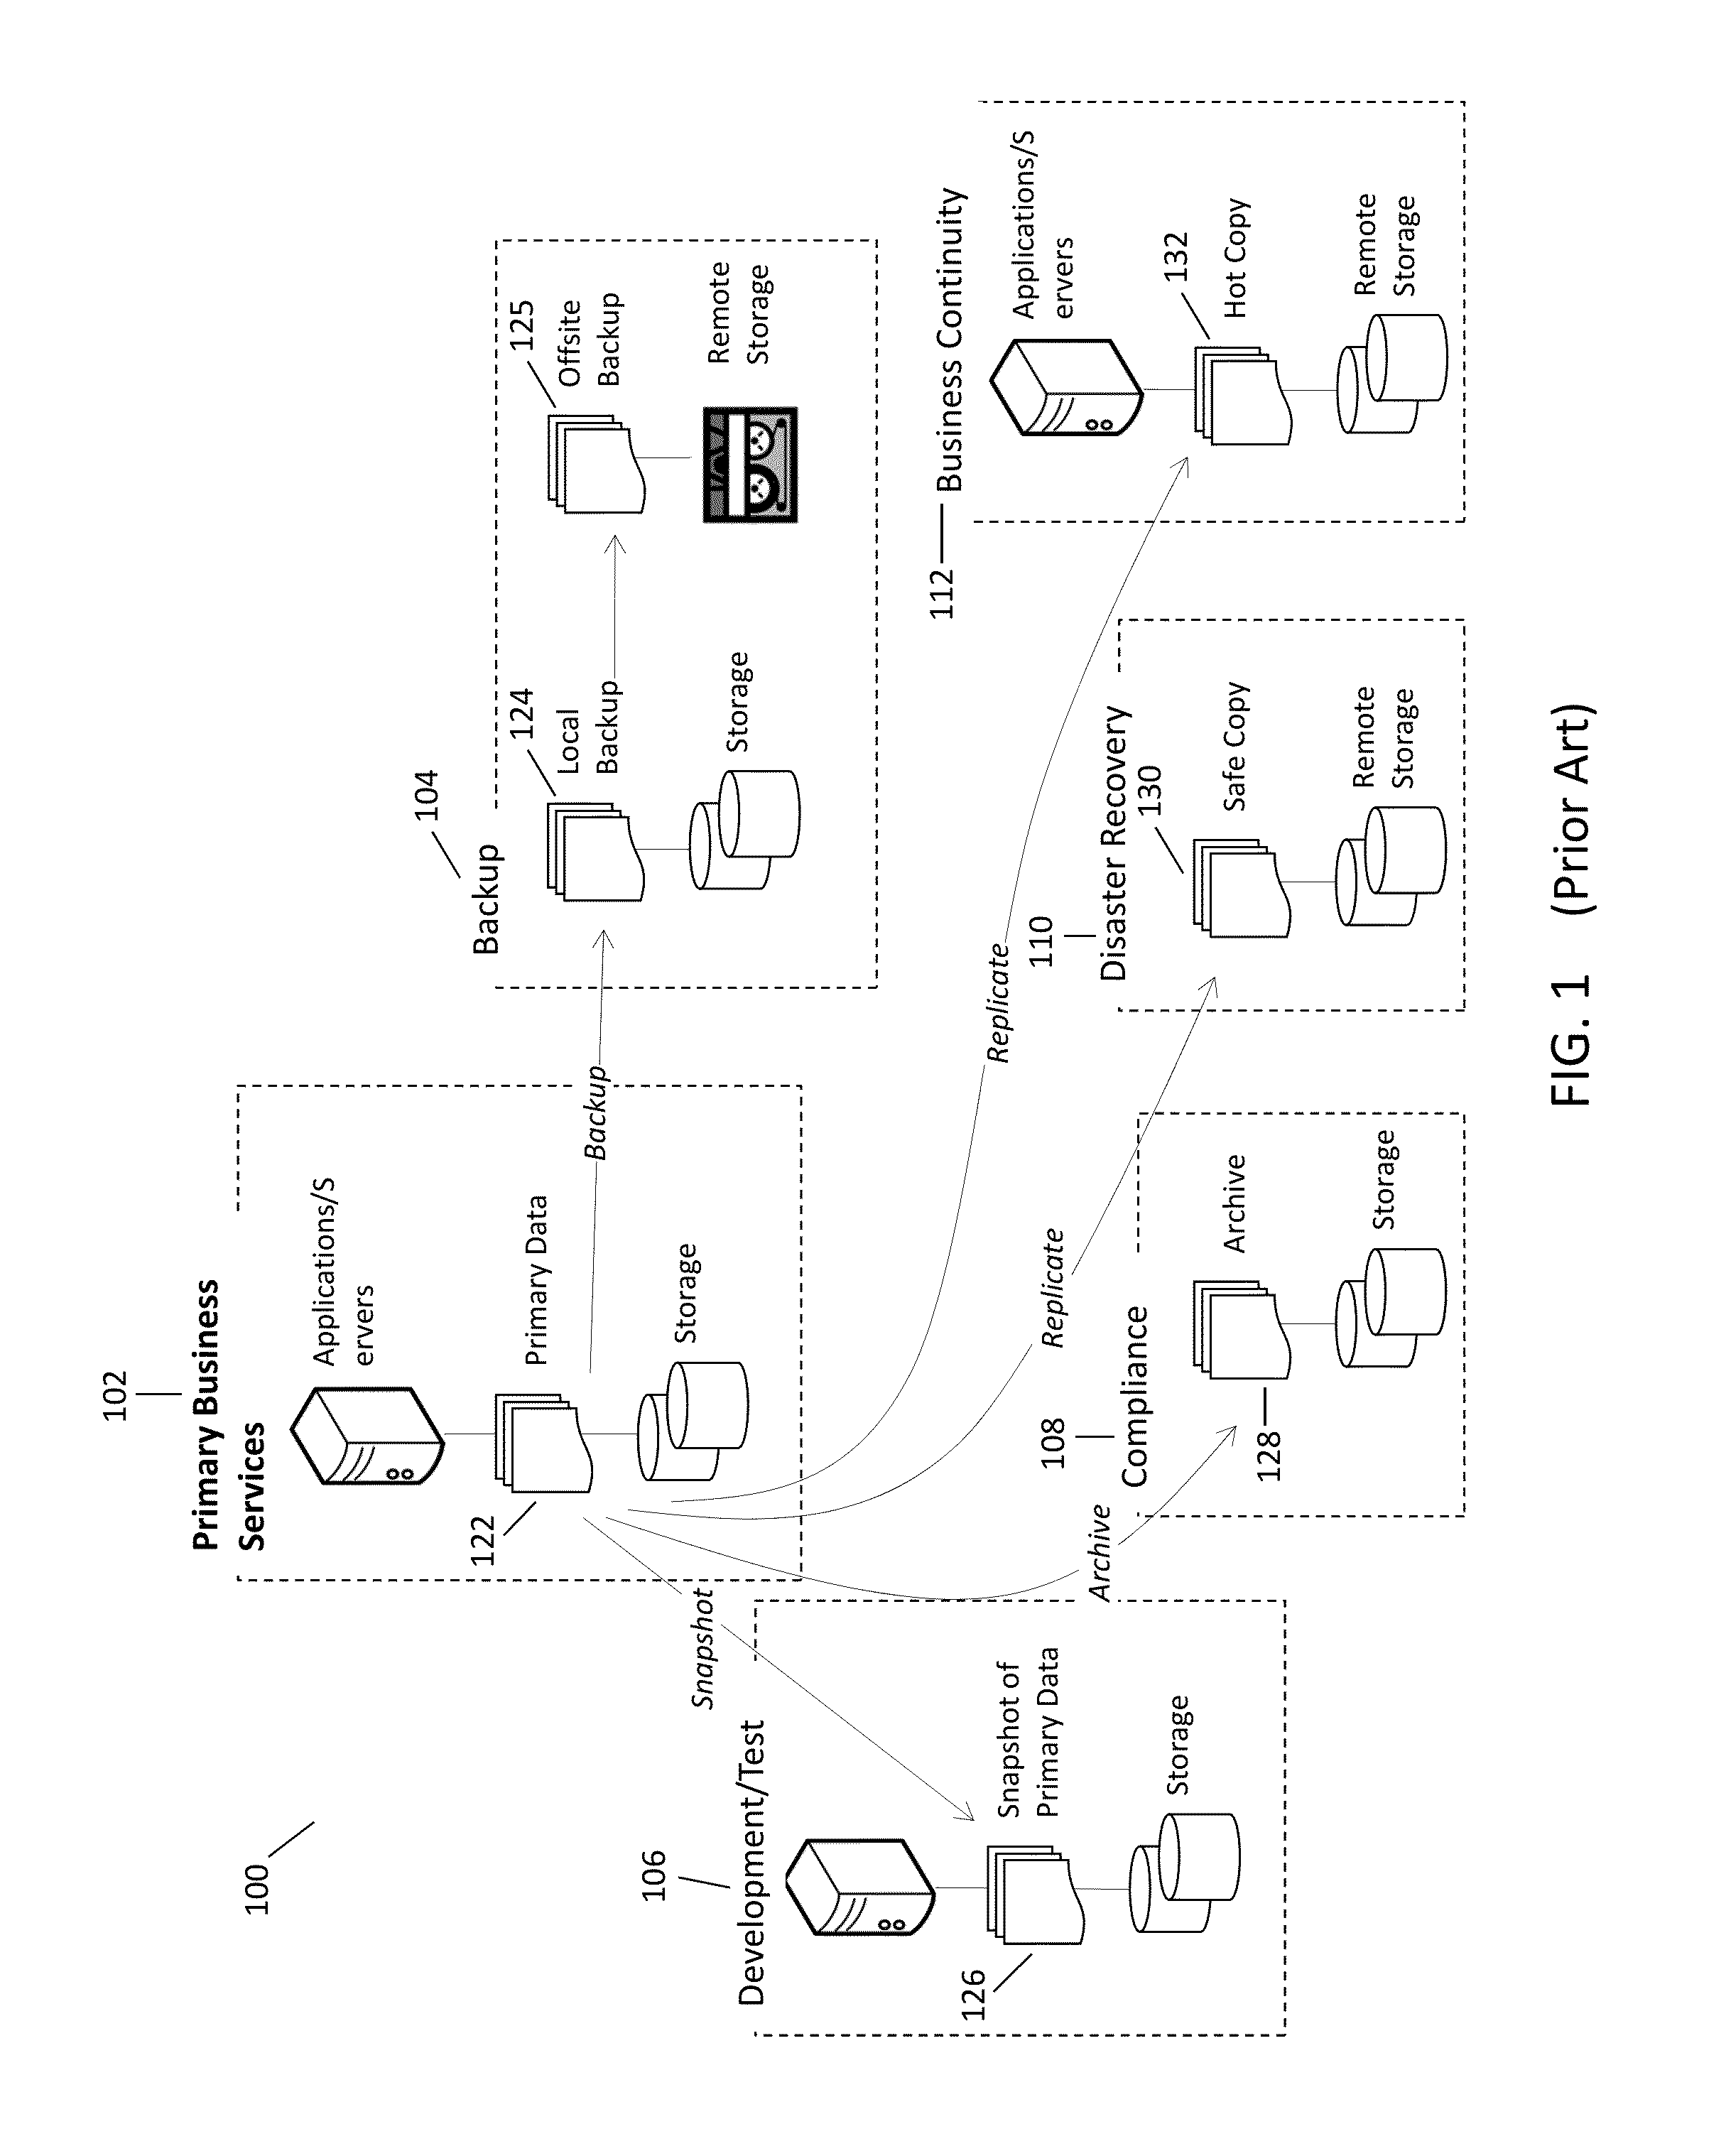 System and method for efficient database record replication using different replication strategies based on the database records